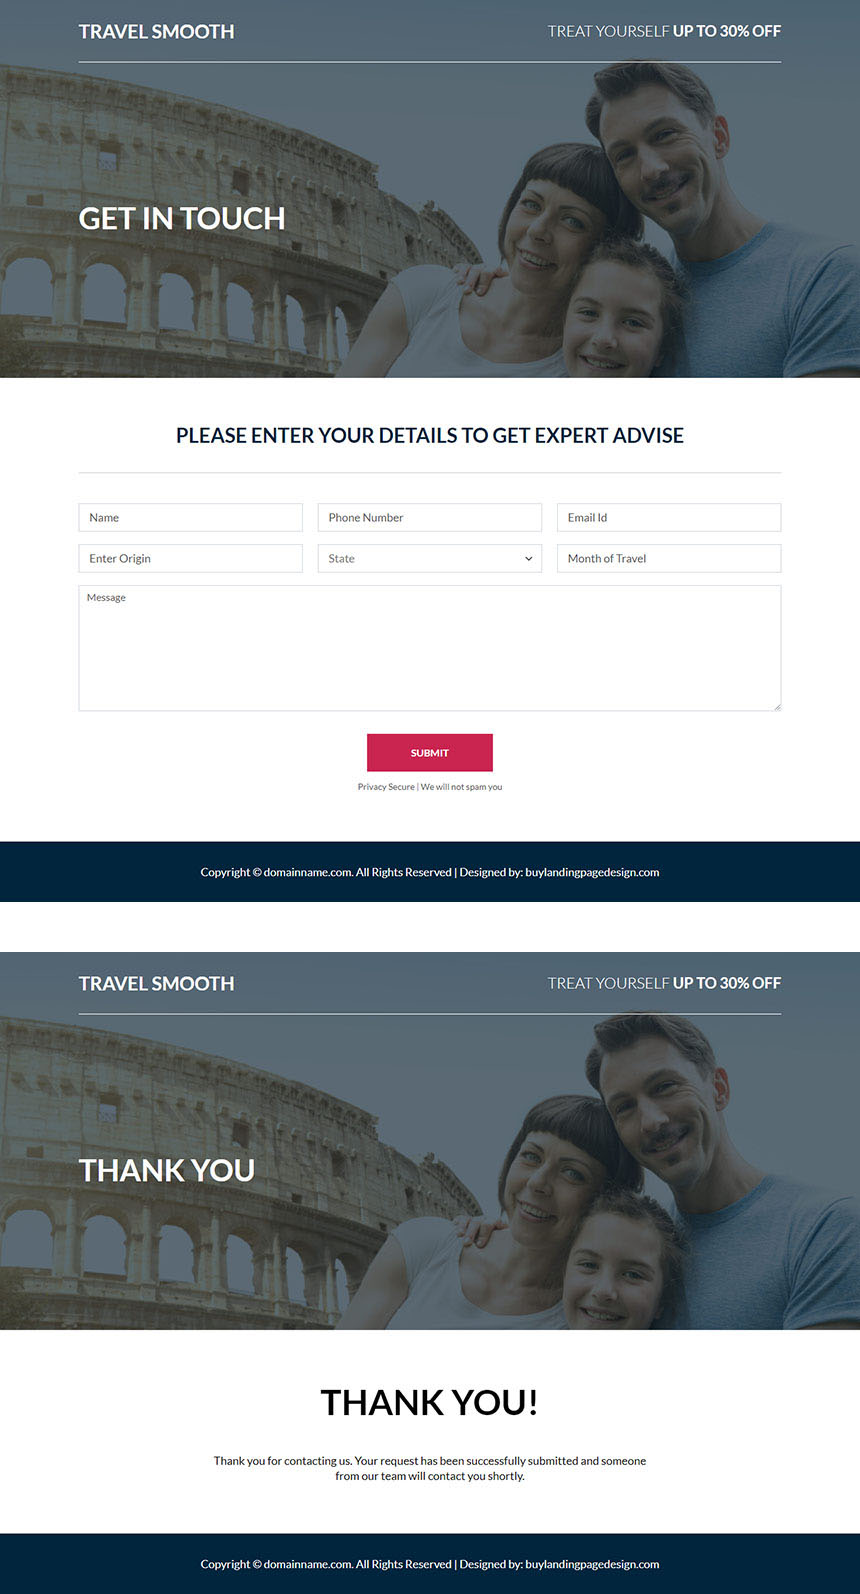 affordable vacation packages lead capture landing page